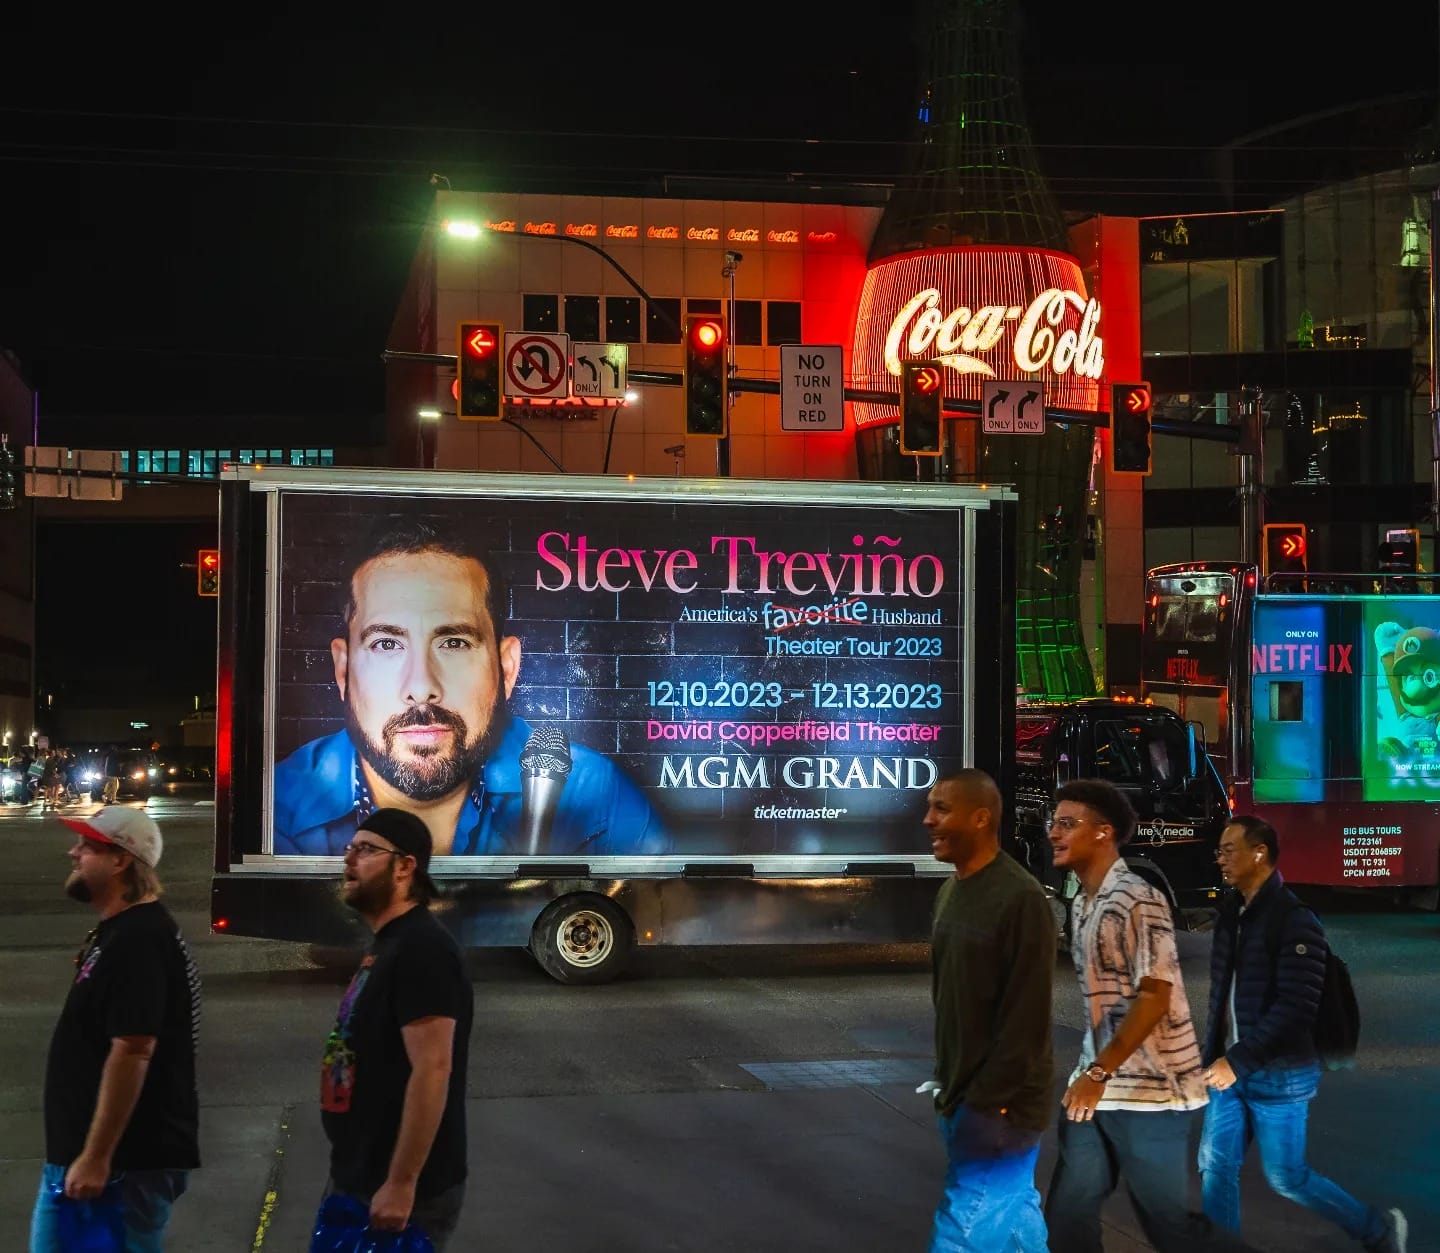 Advertisement truck for Steve Treviño tour at night.